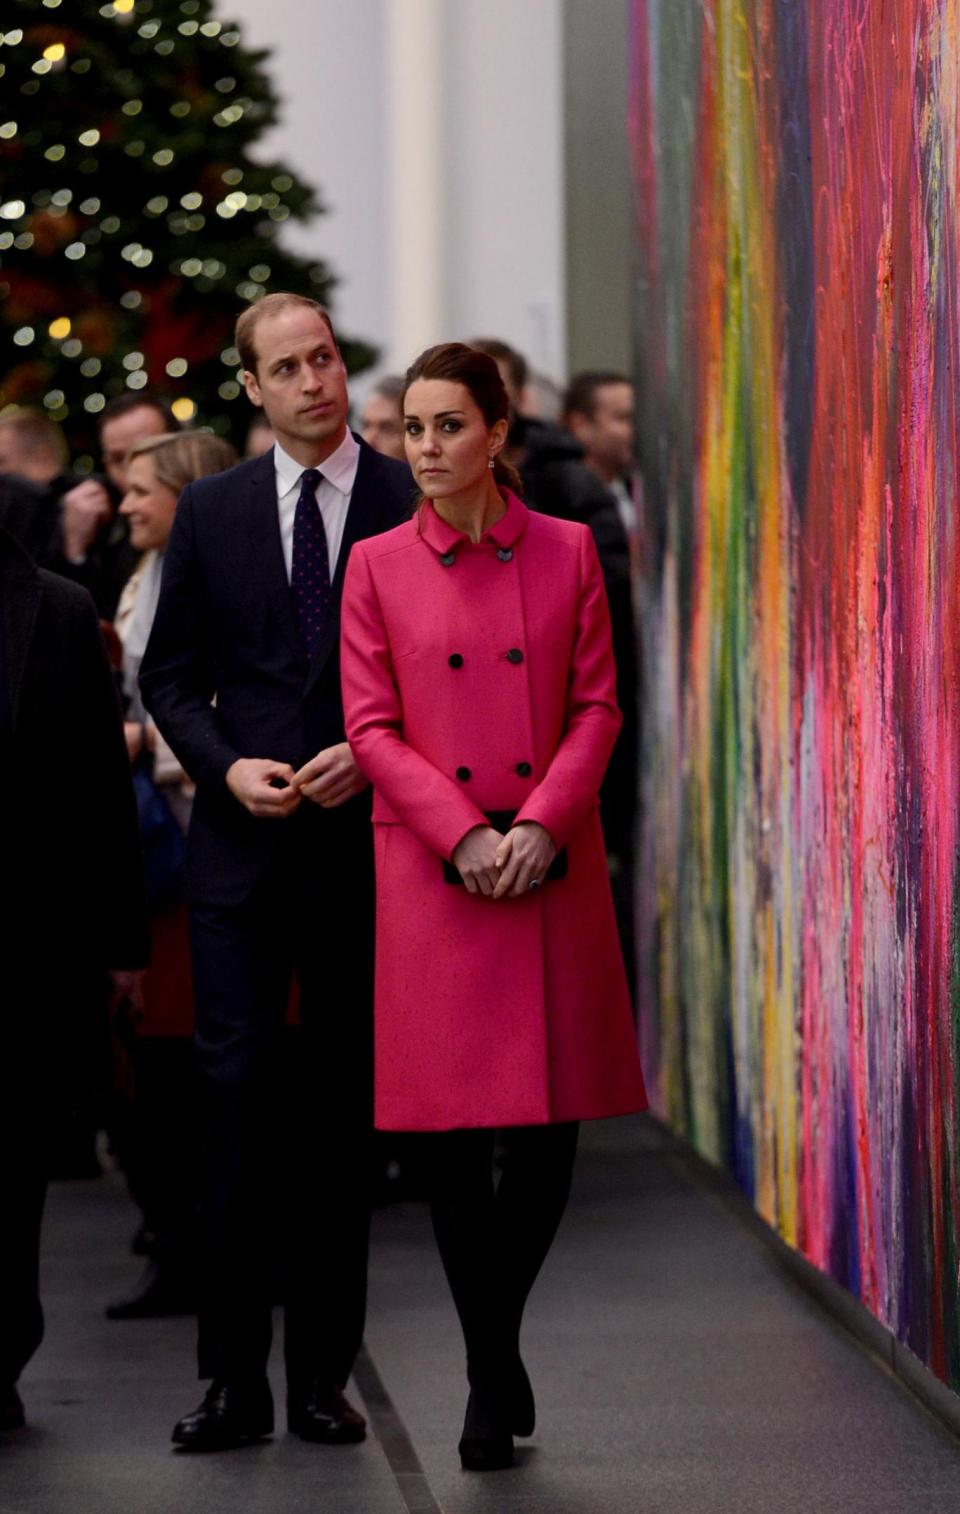 The Duke And Duchess Of Cambridge in New York in 2014 (Getty Images)